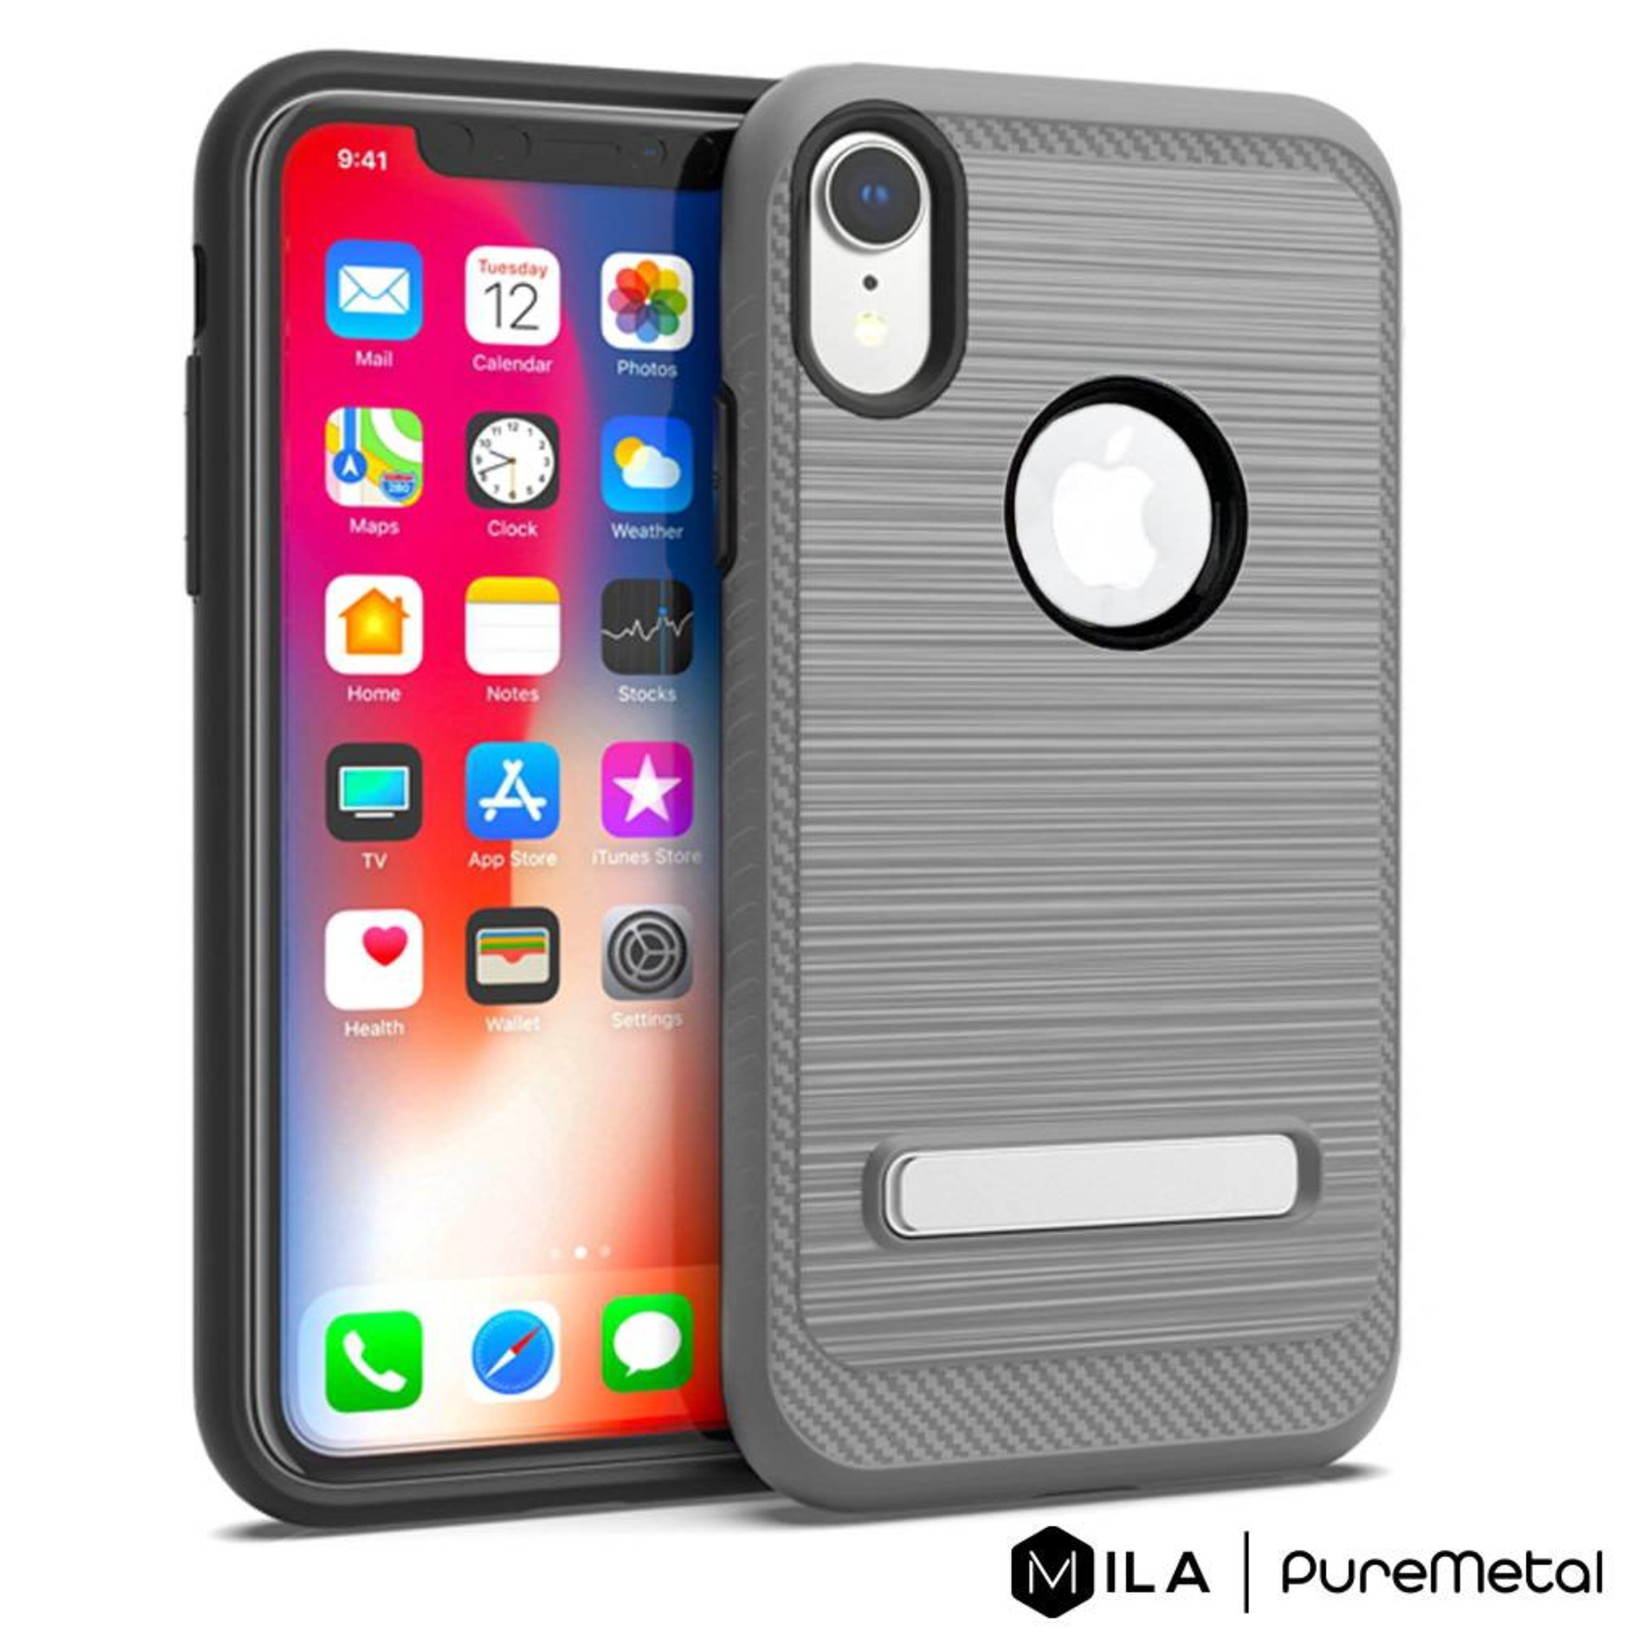 MILA | PureMetal Case for iPhone X / XS